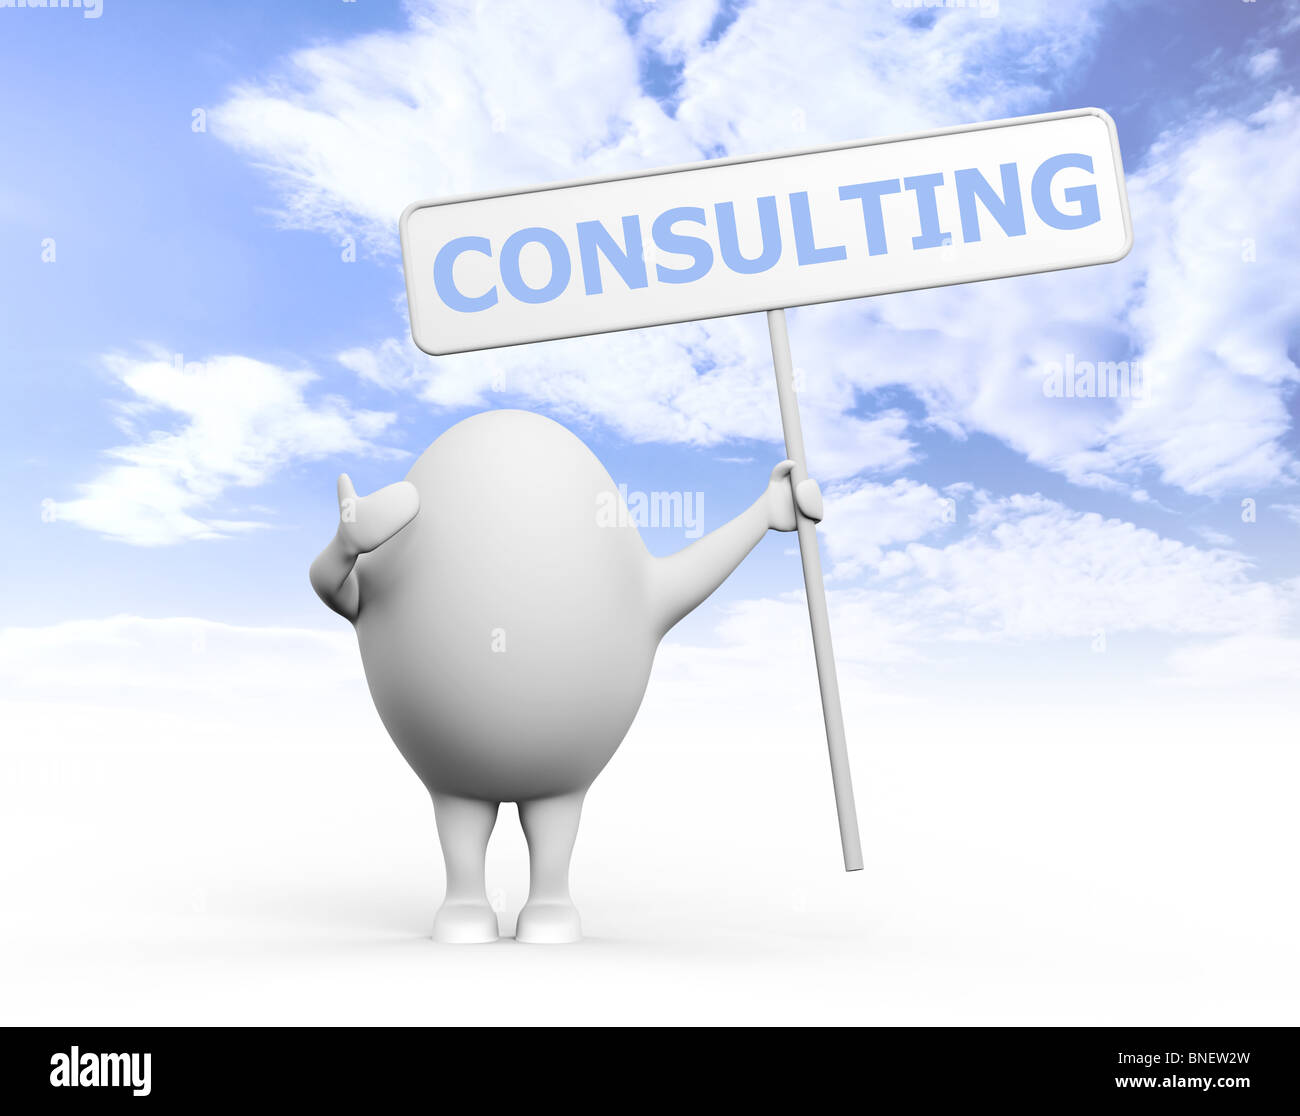 3D illustration of a cartoon egghead character holding a sign with Consulting written on it under blue sky Stock Photo